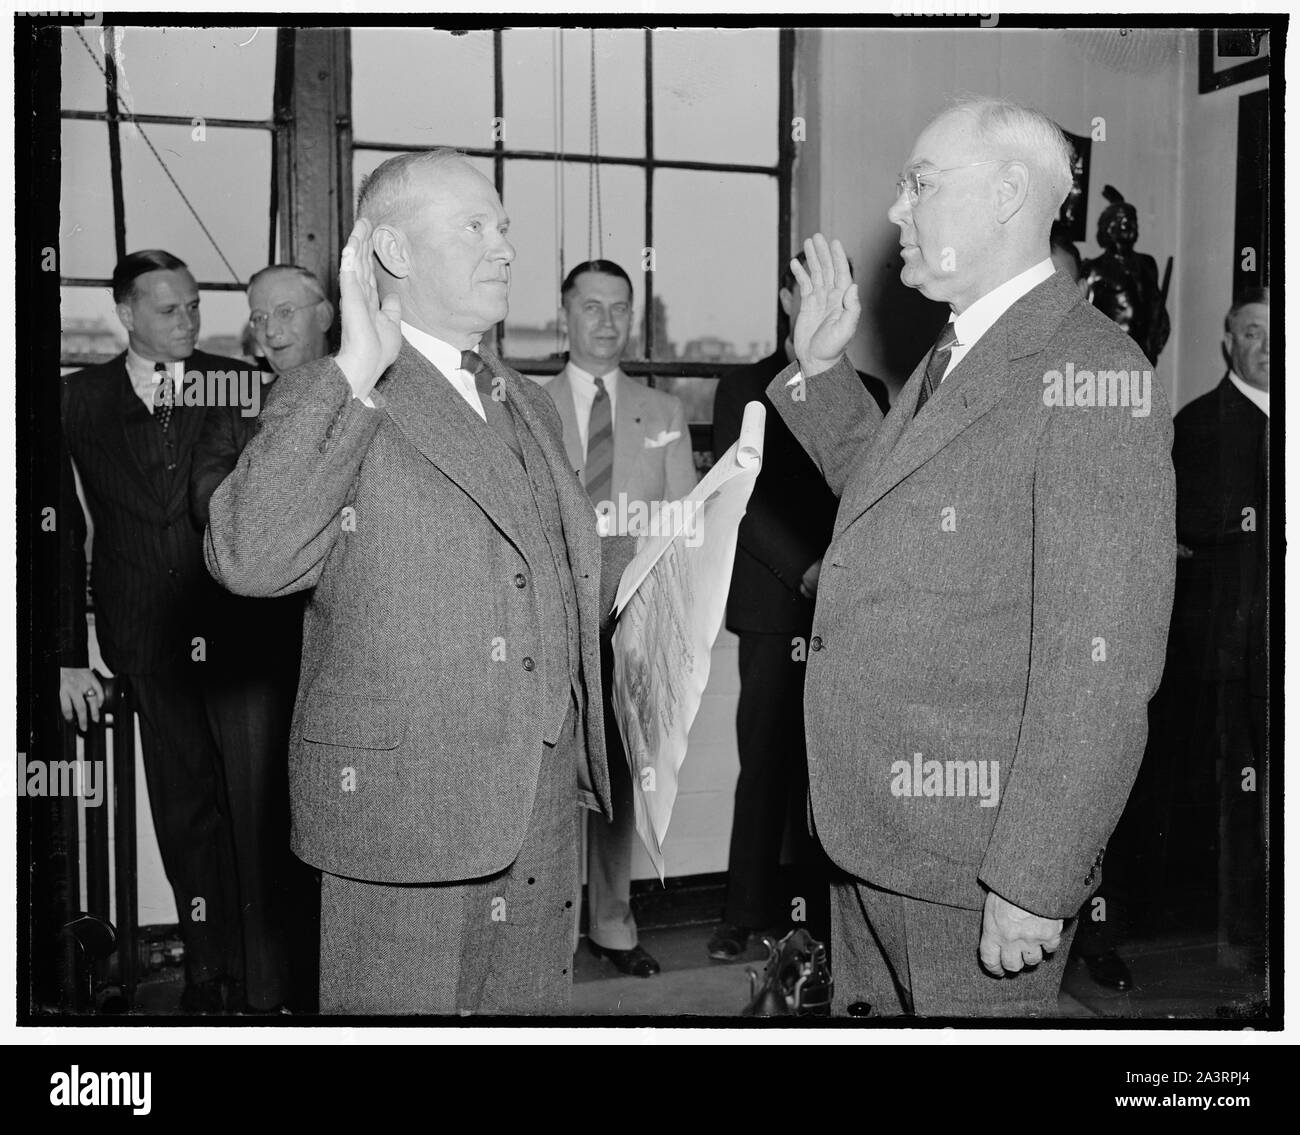 Takes oath as U.S. Marine Corps Paymaster. Washington, D.C., May 2. Maj. Gen. Thomas Holcomb, (left) Commandant of the U.S. Marine Corps, administering the Oath of Office to Brig. Gen. Russell B. Putnam, new Paymaster of the Devil Dogs. He succeeds Brig. Gen. Harold C. Reisinger, 5/2/38 Stock Photo